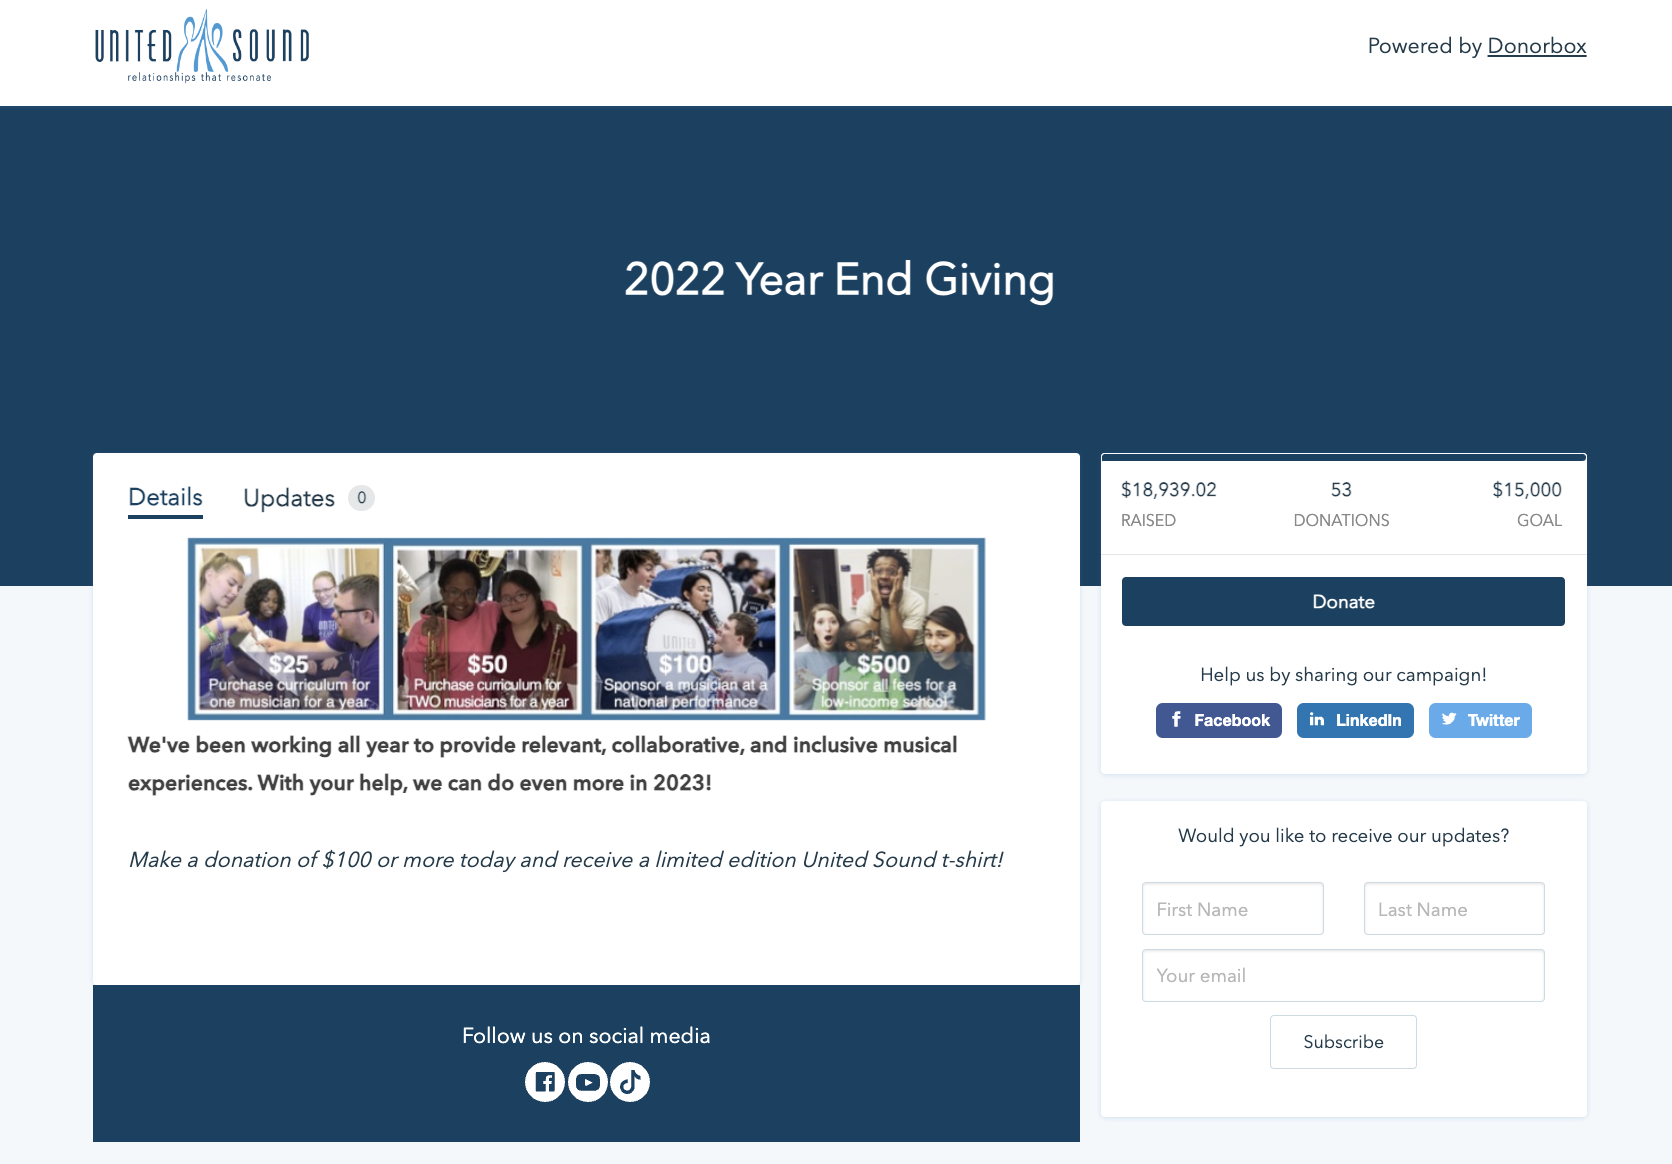 Nonprofit organization United Sound's Donorbox crowdfunding page from Giving Season 2022.